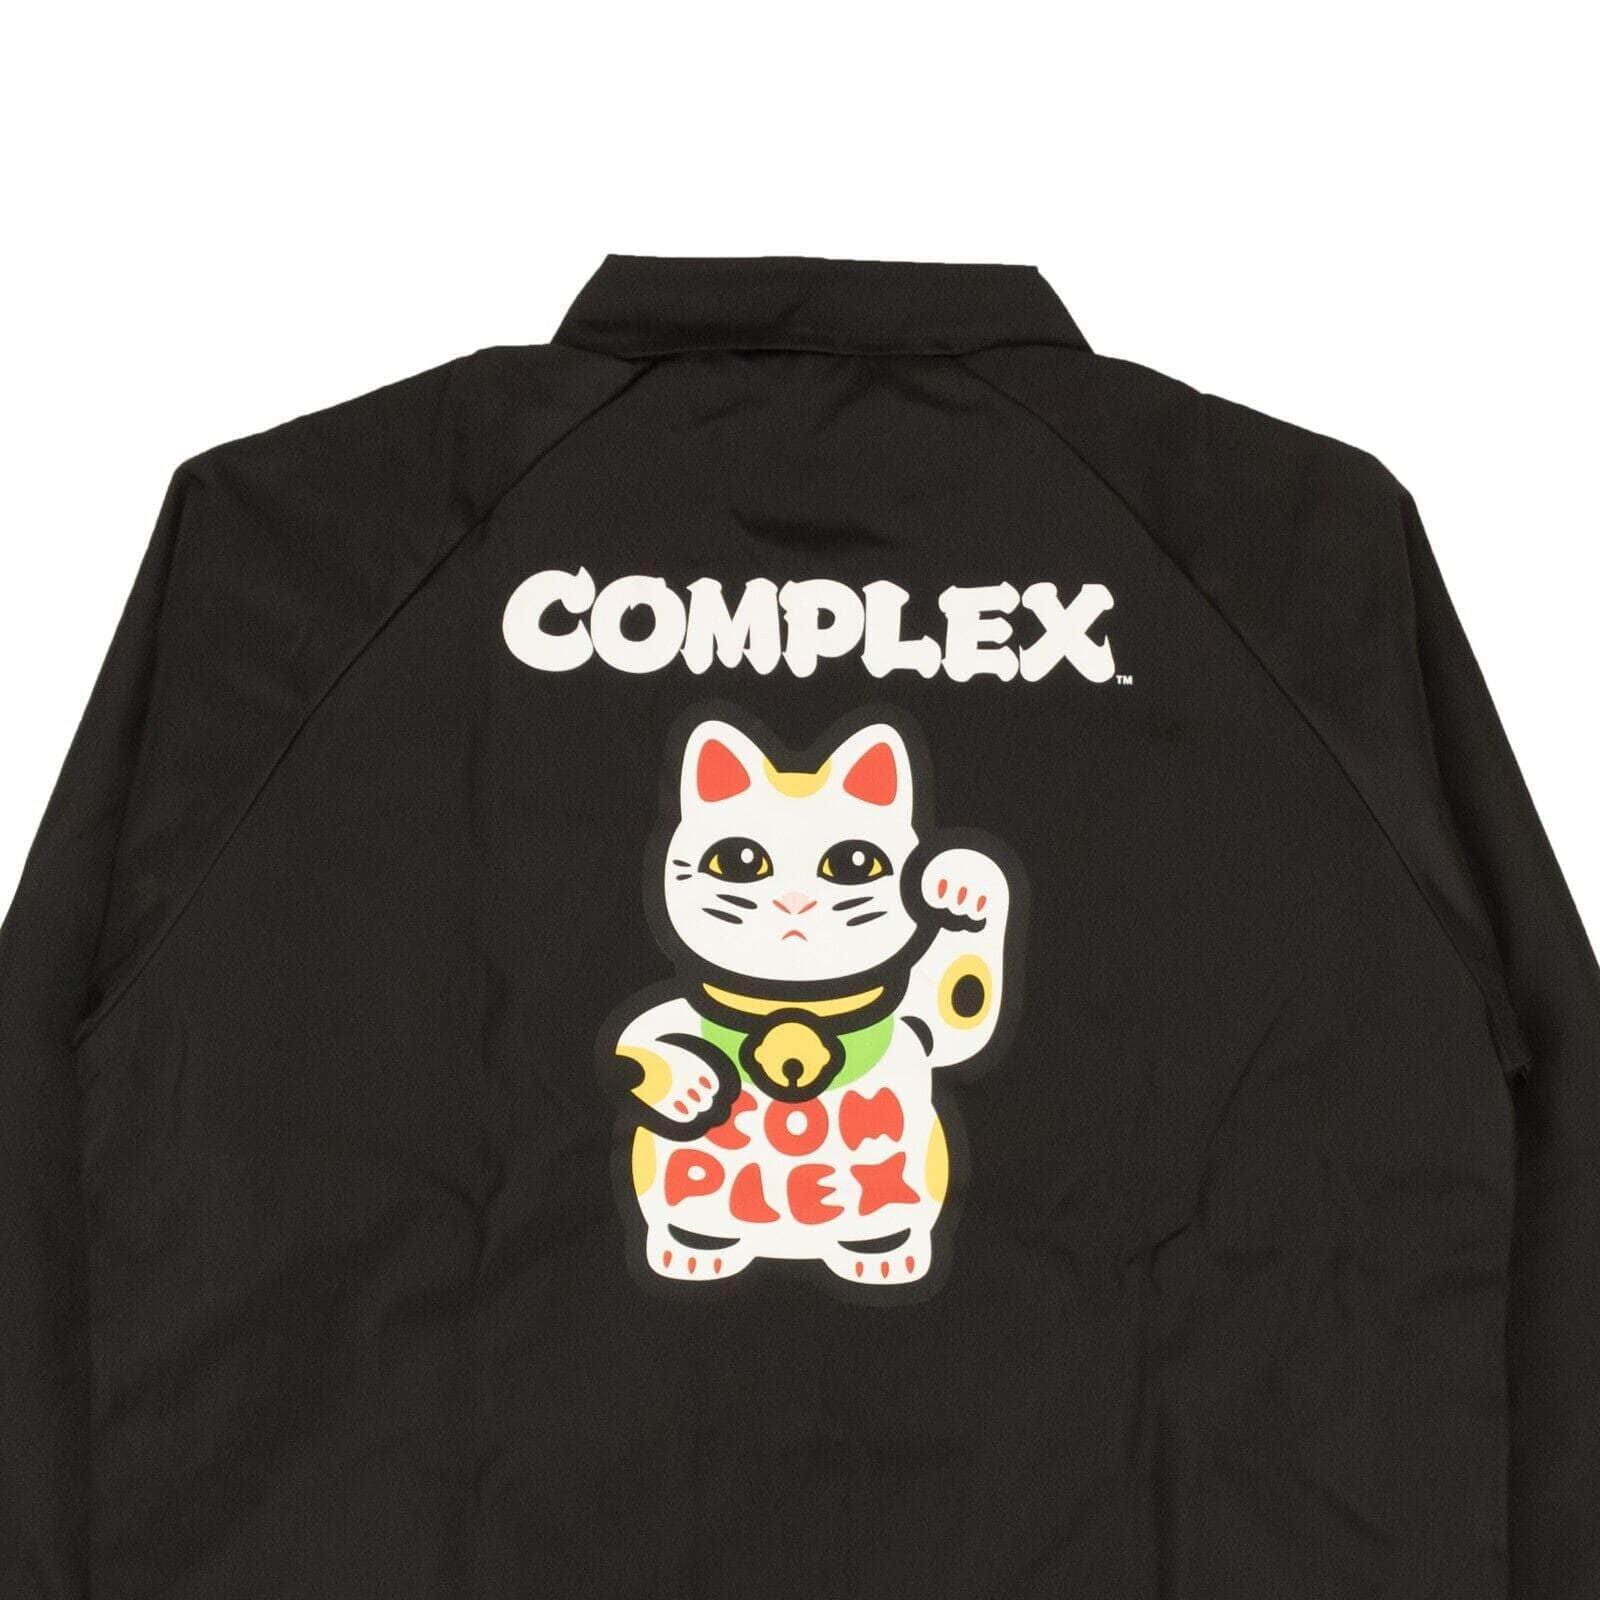 Complexcon x Nigo channelenable-all, chicmi, complexcon-x-nigo, couponcollection, gender-mens, main-clothing, mens-field-jackets, mens-shoes, size-m, size-s, size-xl, size-xs, size-xxl, under-250 20YR Overshirt Jacket